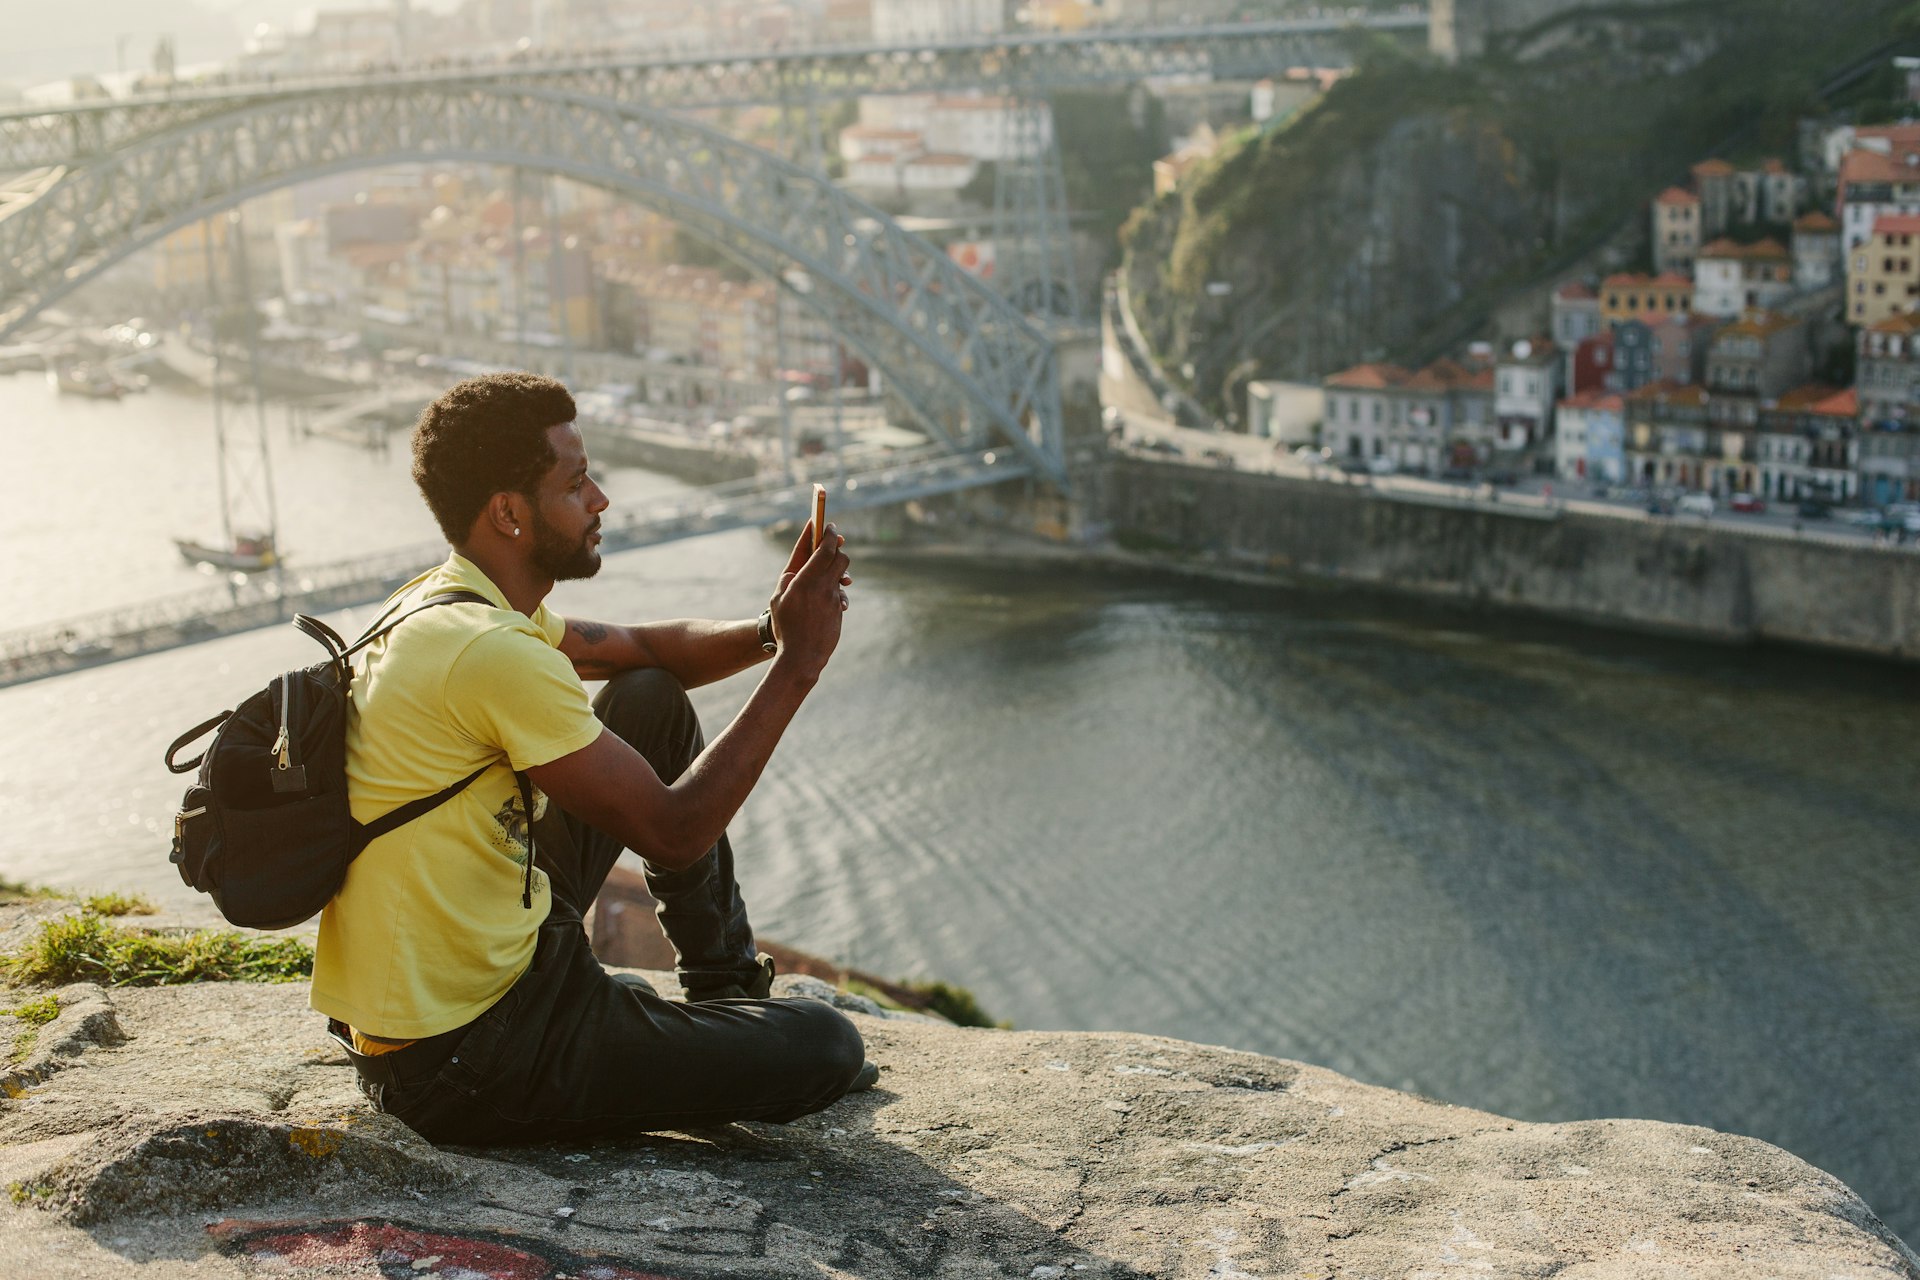 A man sits at a viewpoint of a city over a river and takes a photograph on his phone